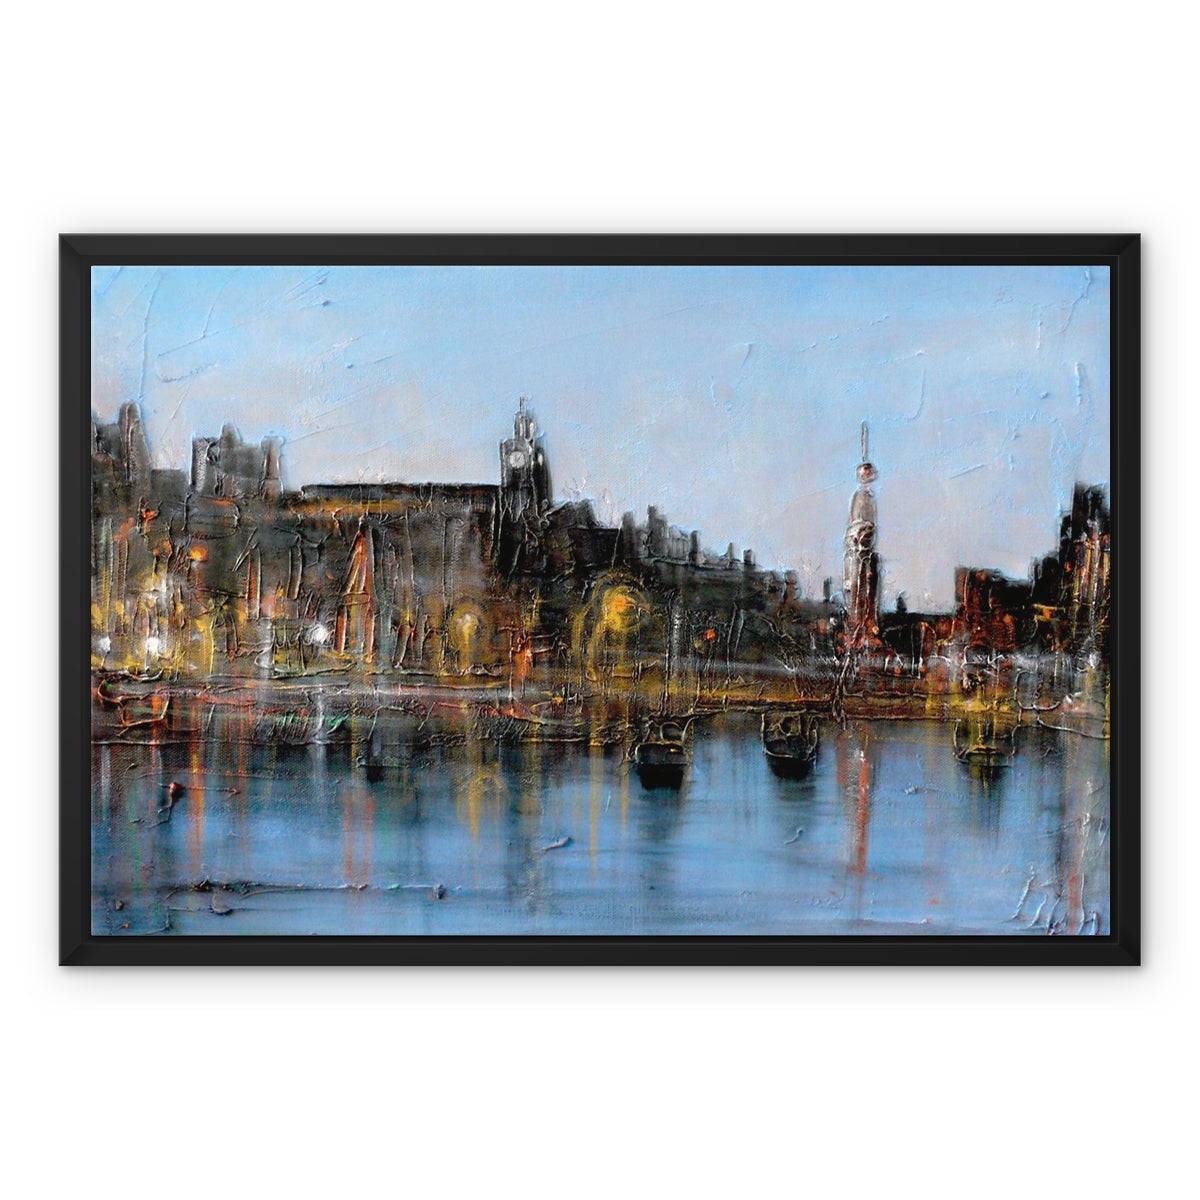 Winter In Amsterdam Painting | Framed Canvas From Scotland-Floating Framed Canvas Prints-World Art Gallery-24"x18"-Paintings, Prints, Homeware, Art Gifts From Scotland By Scottish Artist Kevin Hunter